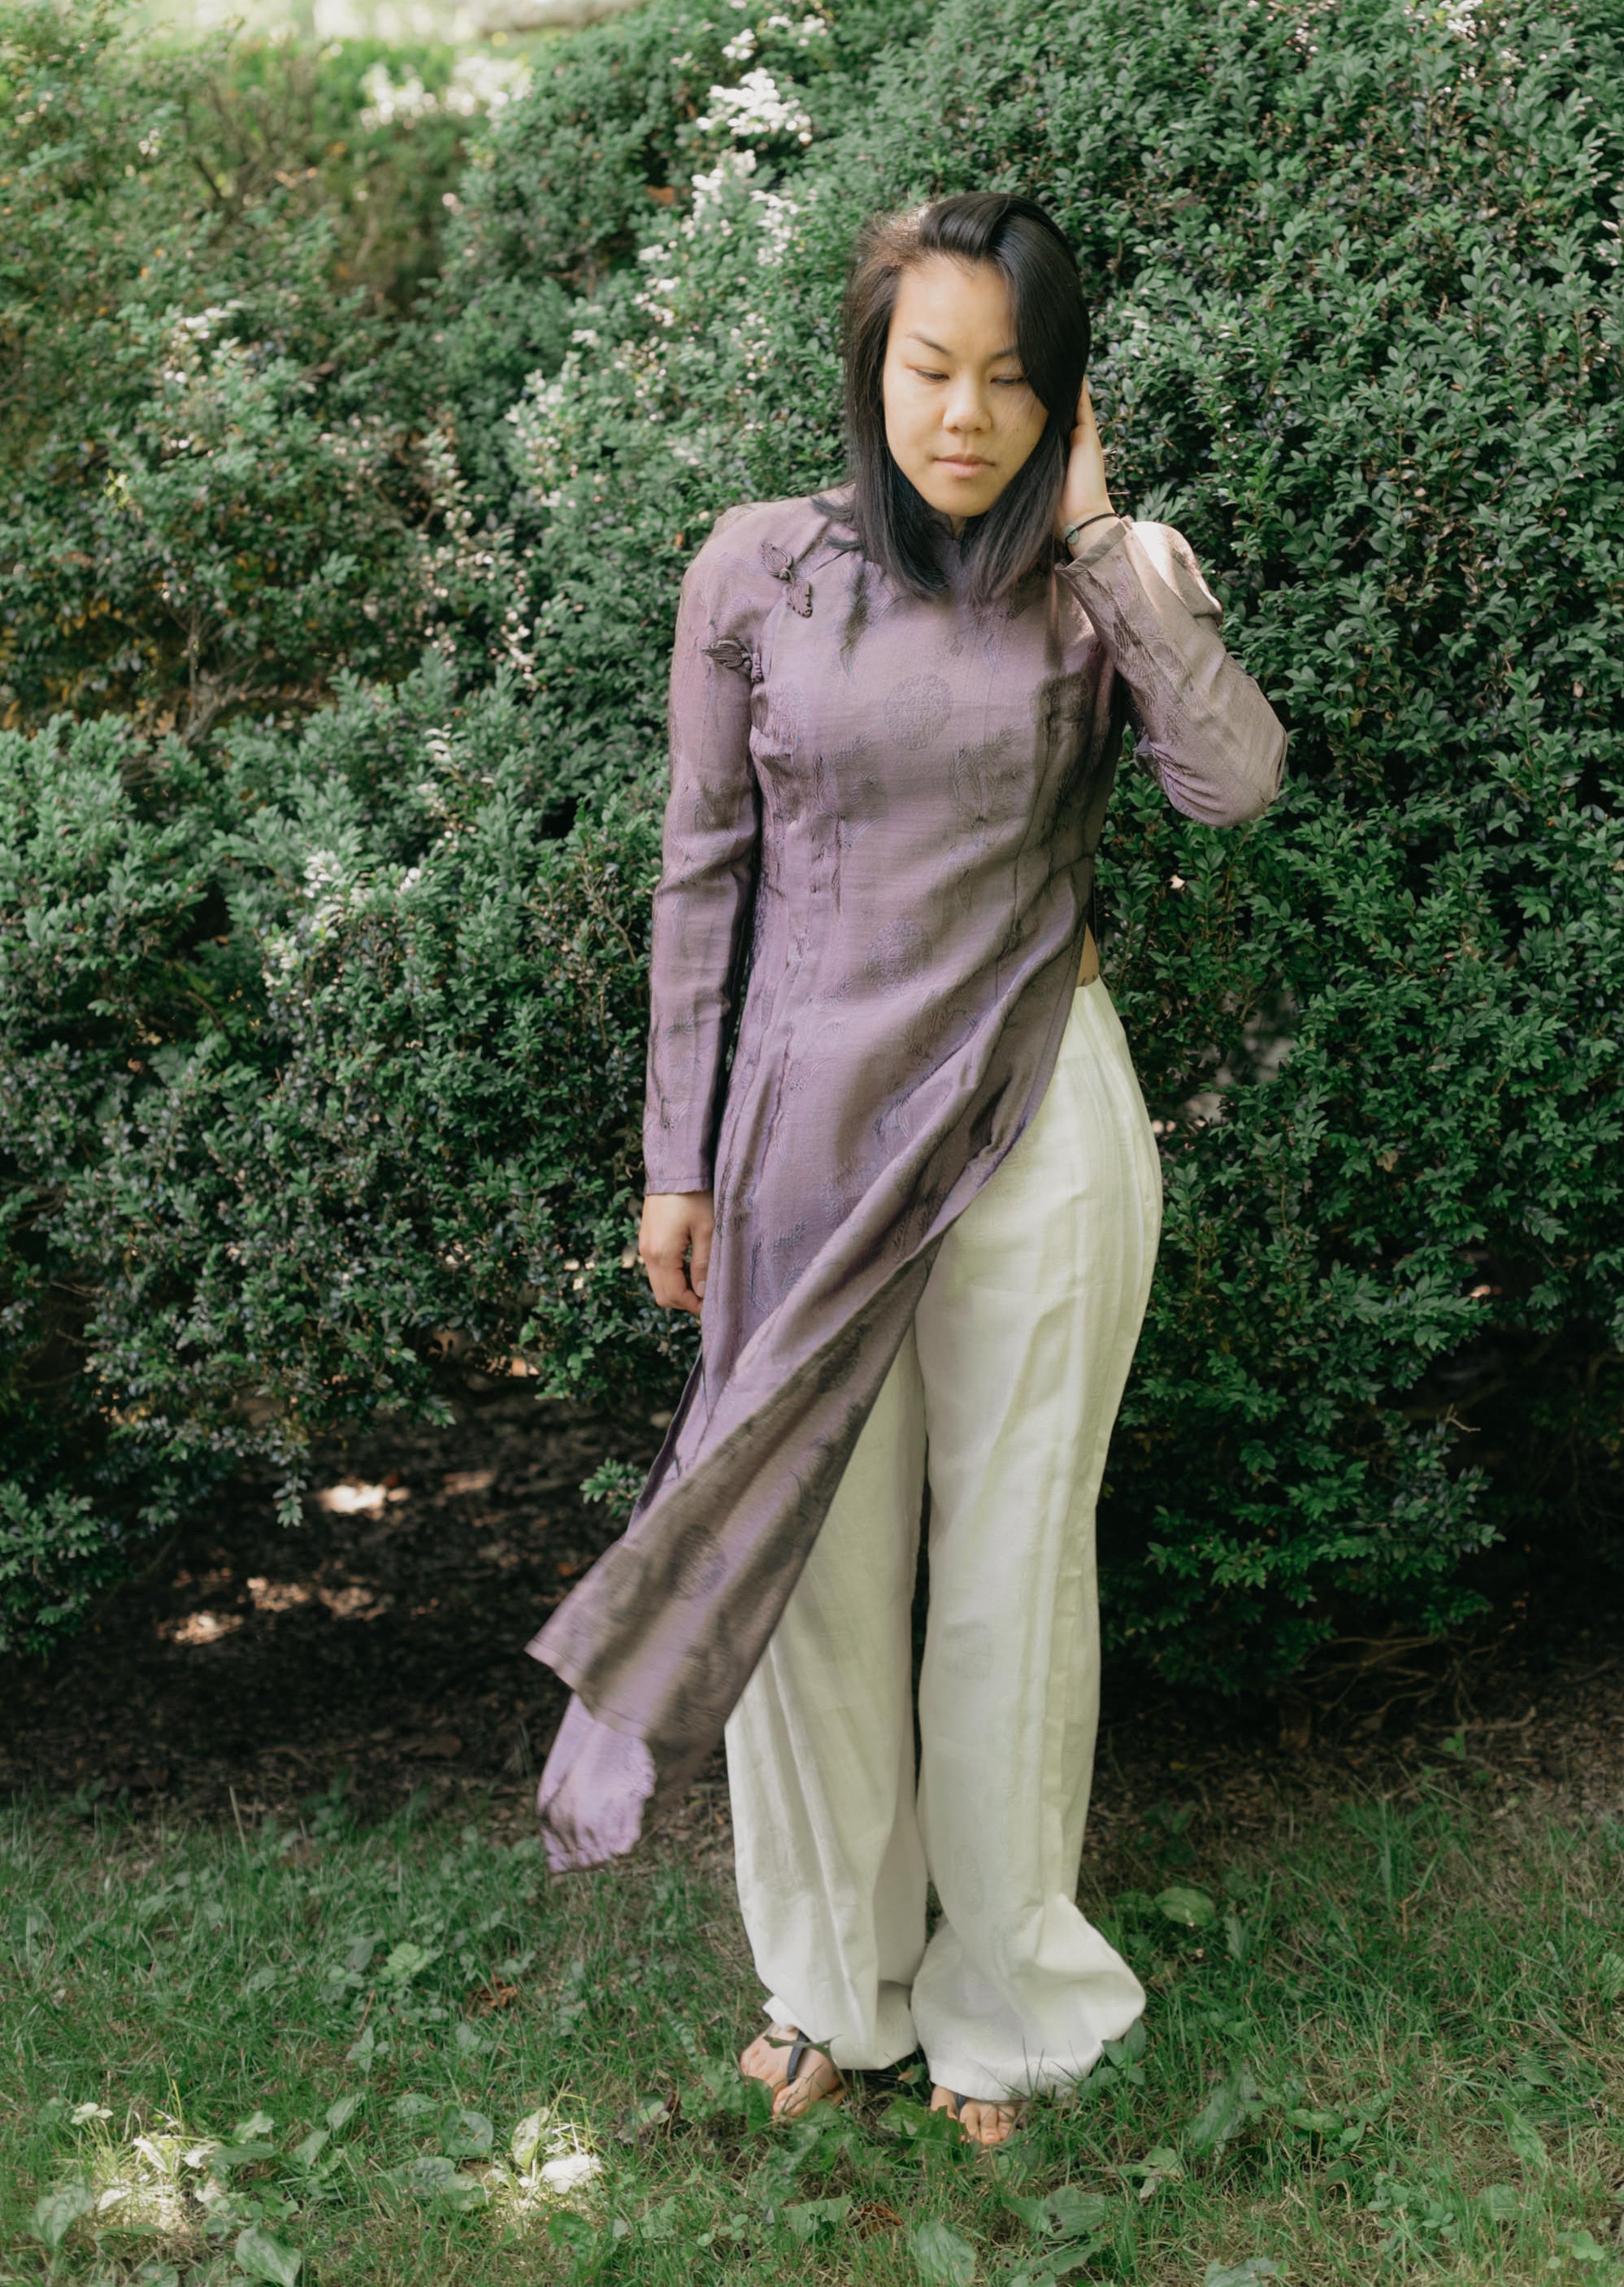 Vietnamese American woman wearing a purple silk Ao Dai tunic with white pants and sandals. She is standing in a lawn with shrubs in the background and her hand is at her hair.